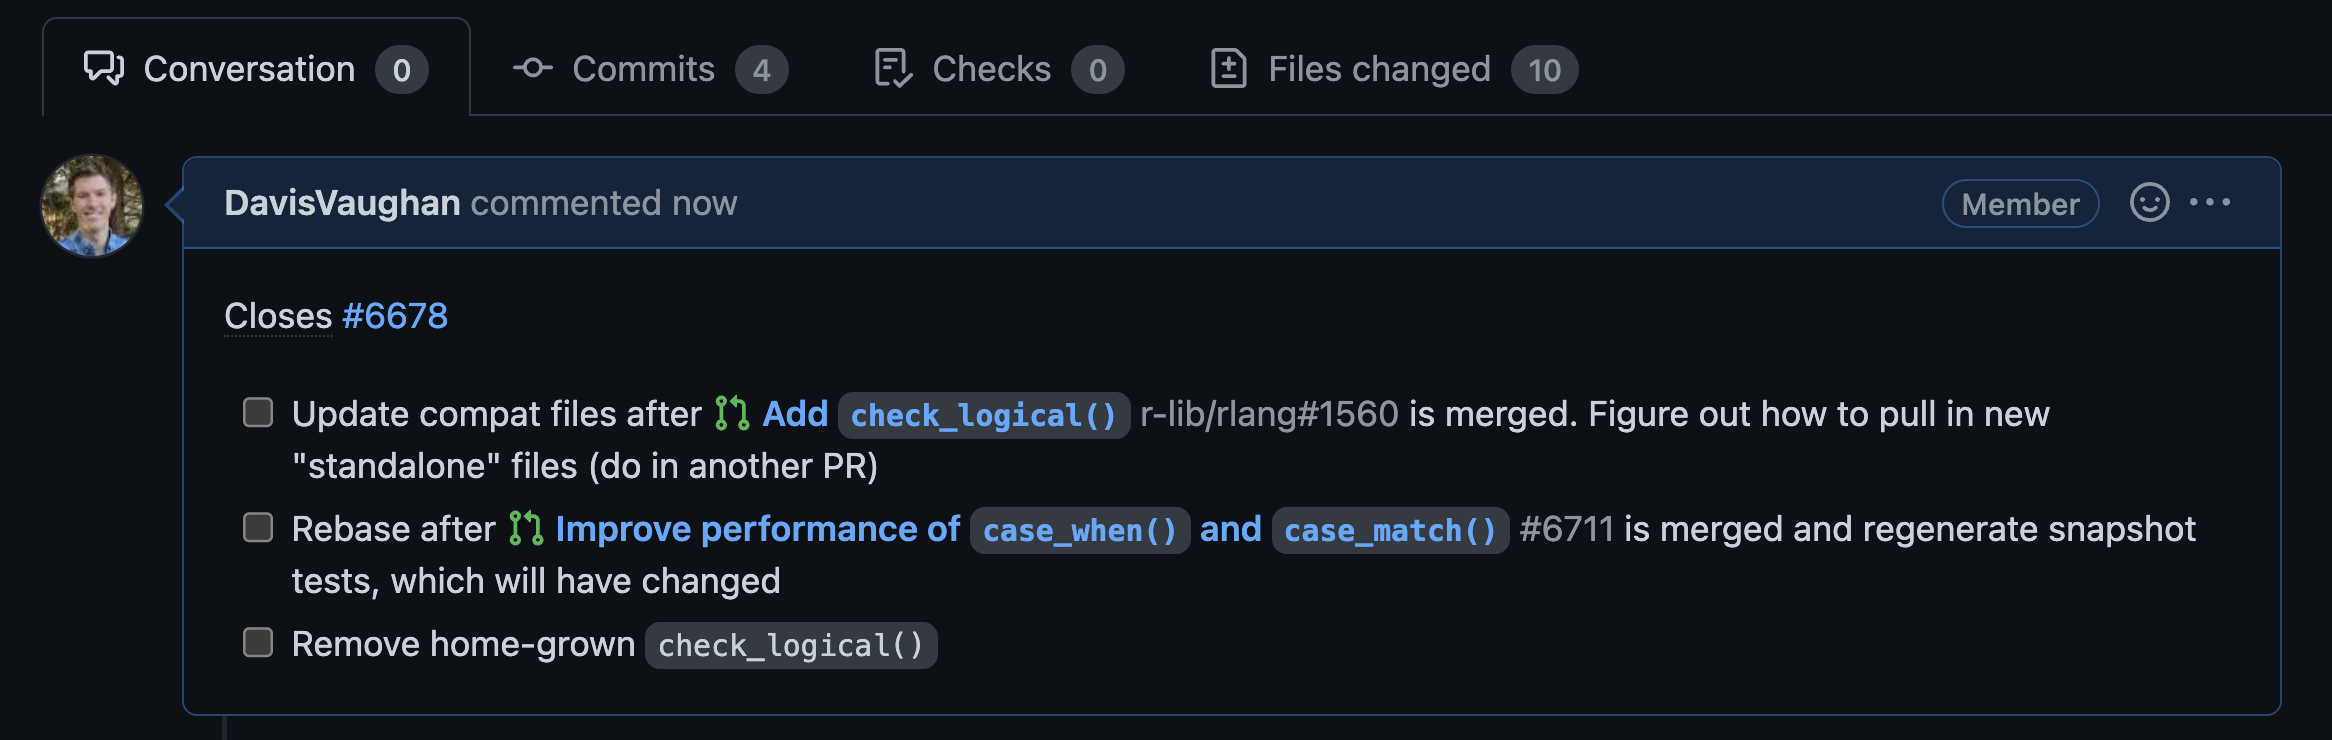 GitHub interface showing a commit message with a checklist of items each of which has an unchecked box.